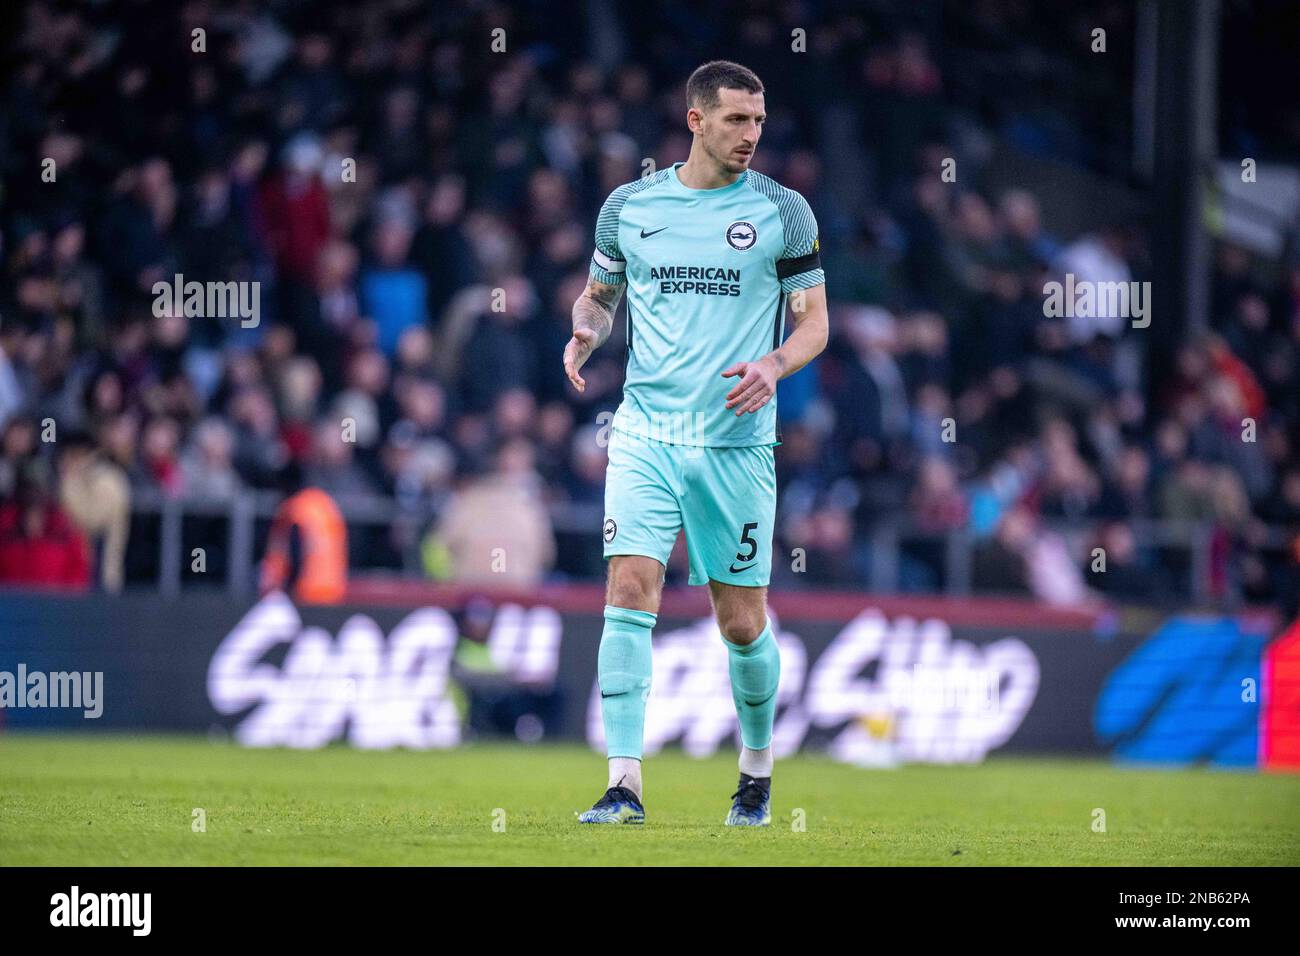 LONDON, ENGLAND - FEBRUARY 11: Lewis Dunk of Brighton & Hove Albion during the Premier League match between Crystal Palace and Brighton & Hove Albion Stock Photo